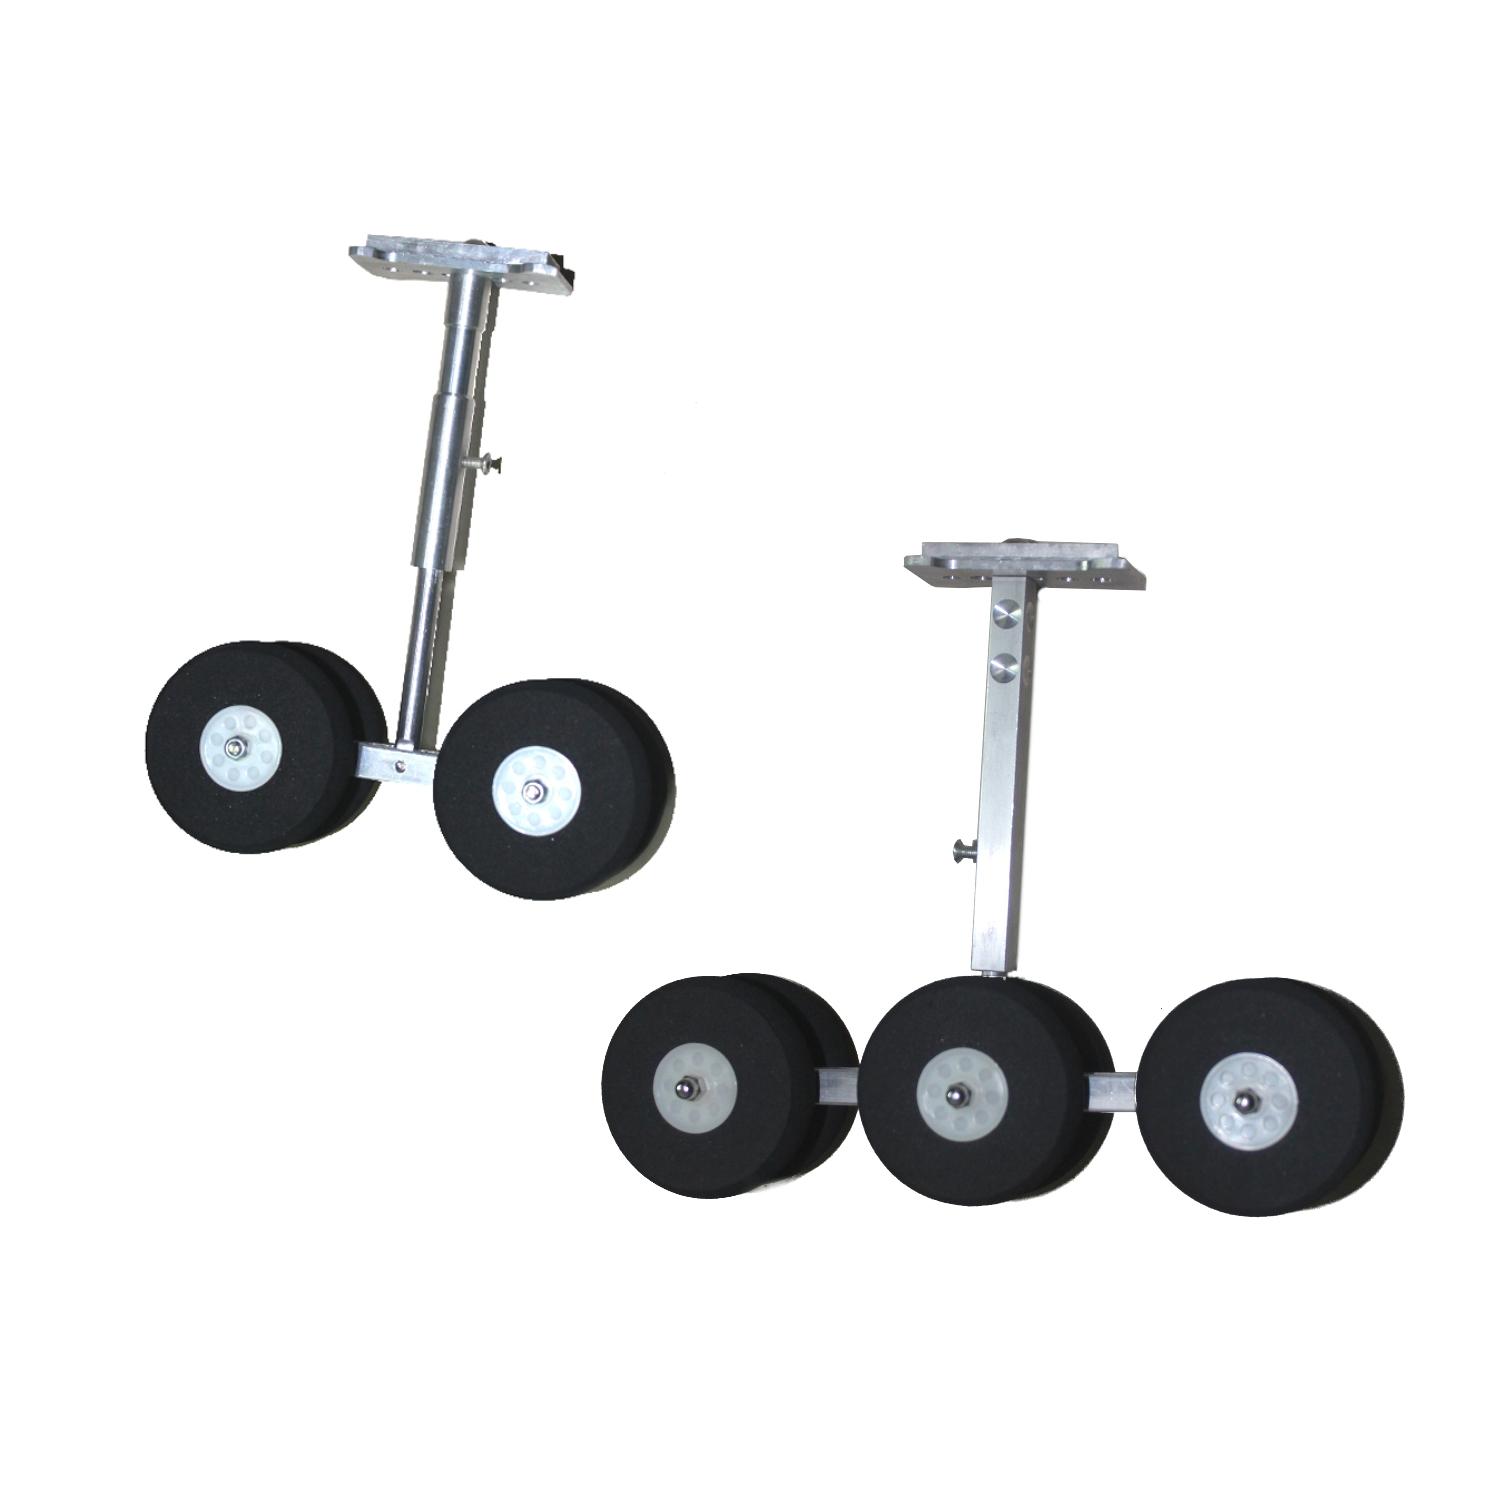 Anti-Vibration Landing Gears for 4-6 KG airplane ф5xD4mmx130mm 